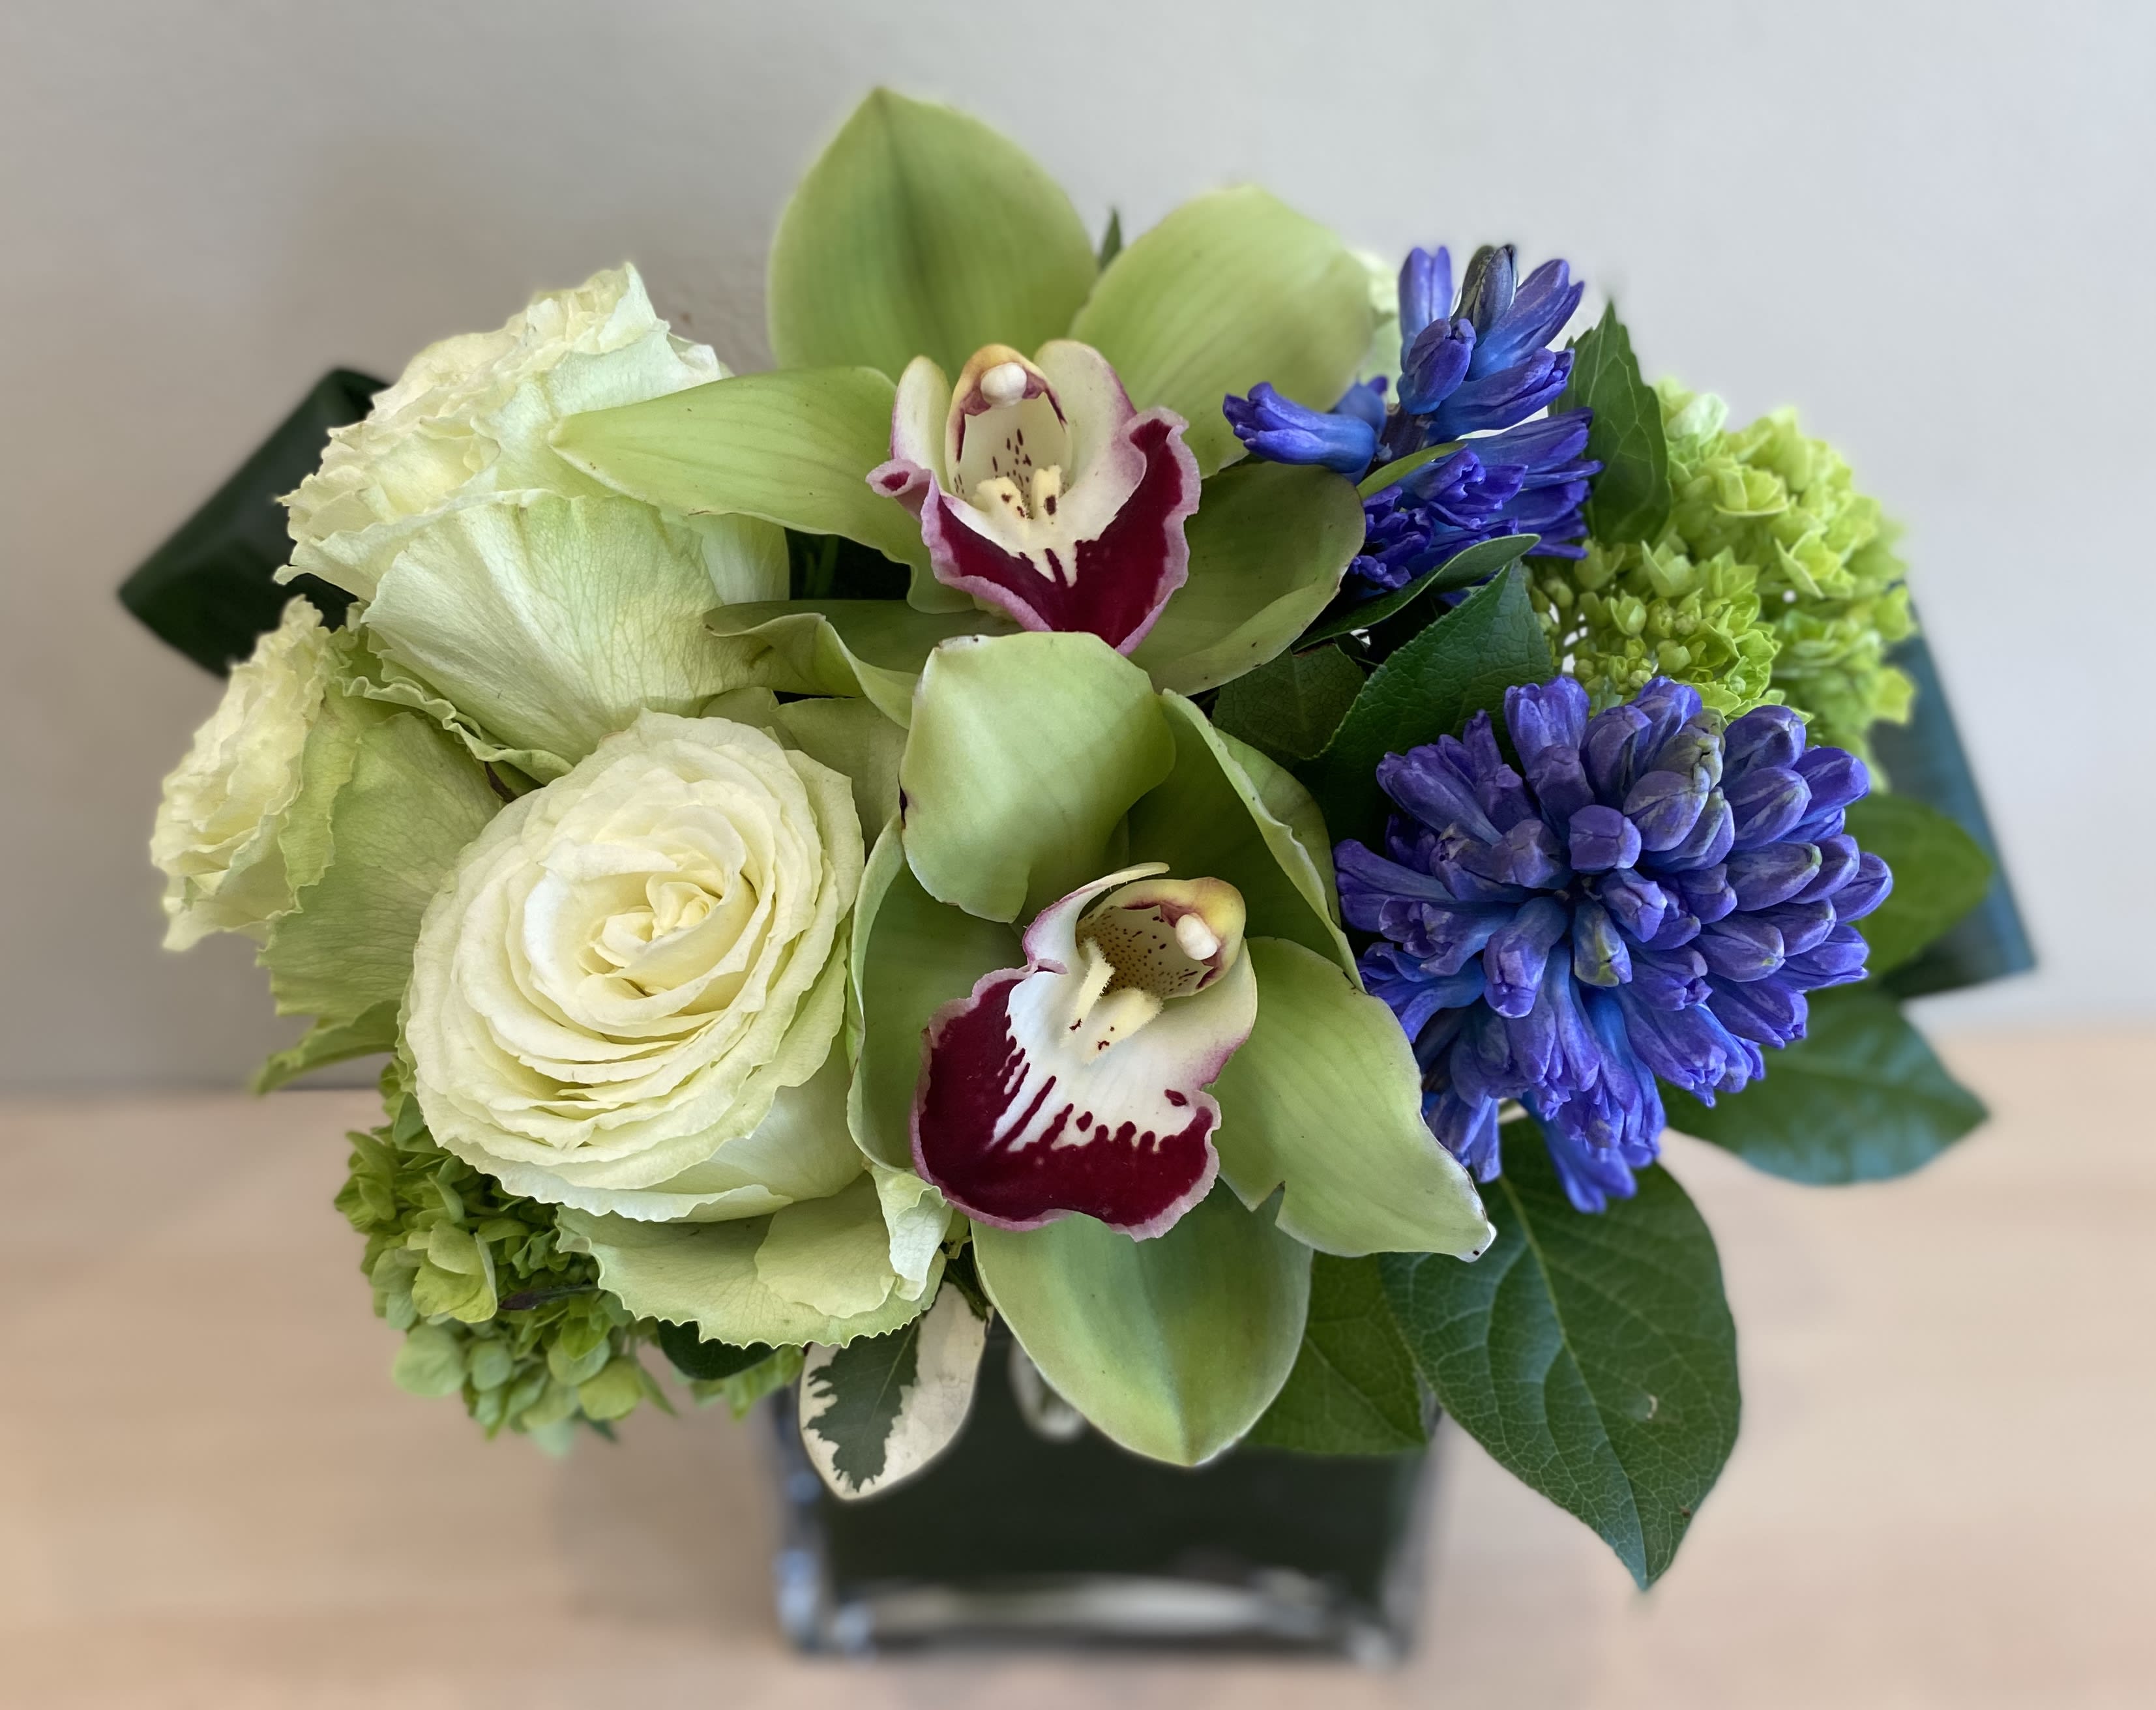 Fragrant Touch - Fresh green lemonade roses, green cymbidium orchids, green hydrangea with a touch of beautiful blue fragrant hyacinth.